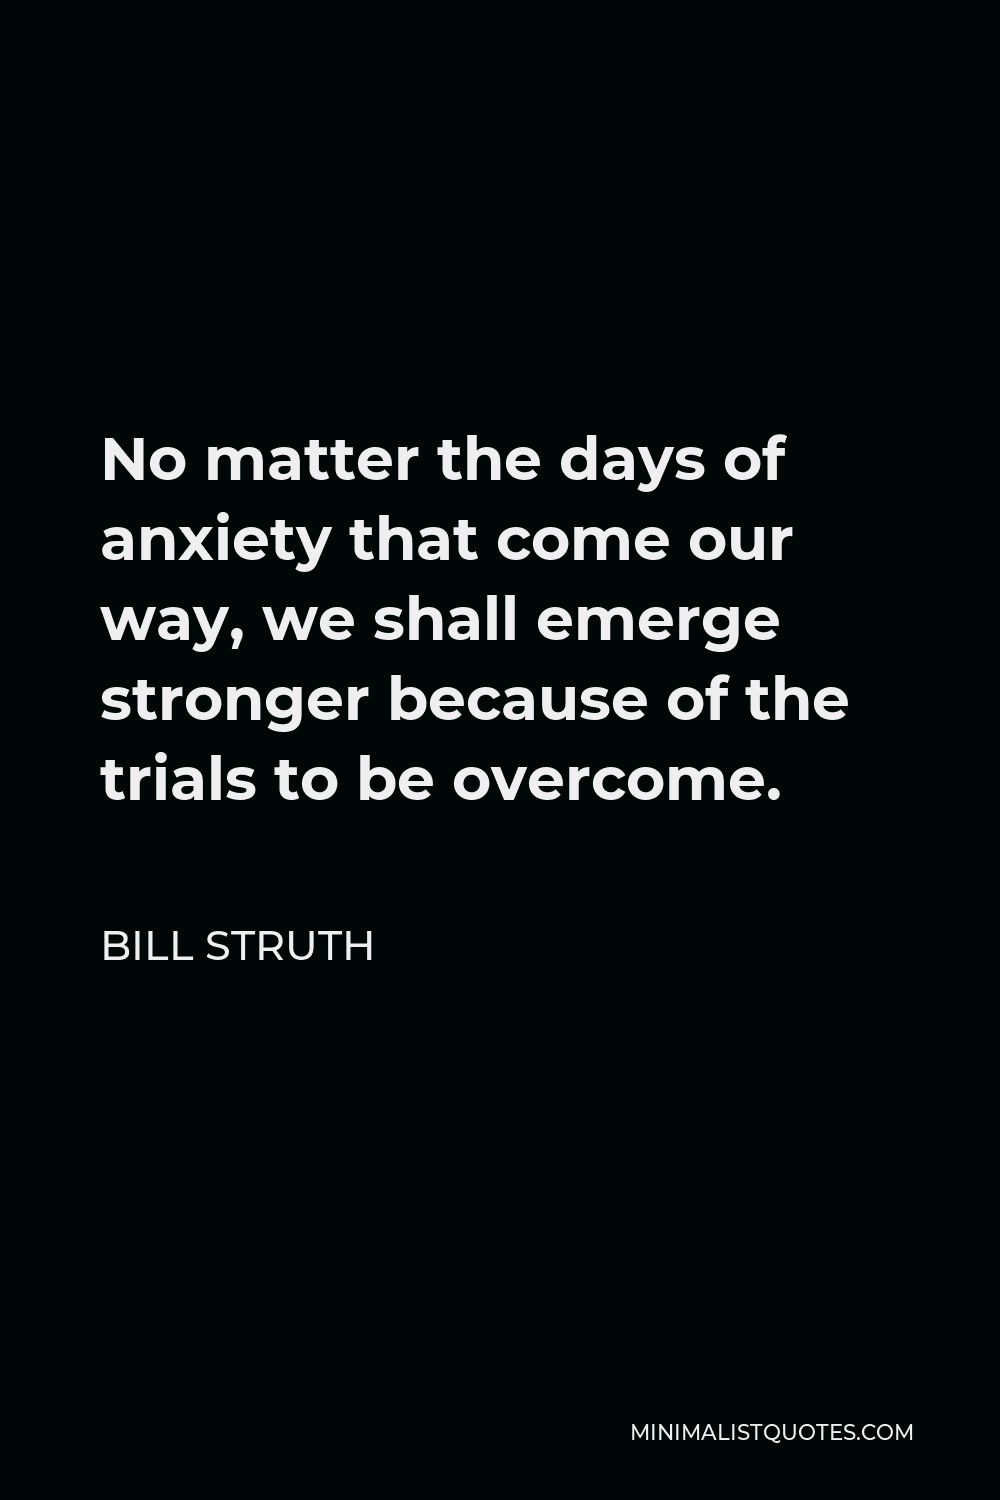 Bill Struth Quote - No matter the days of anxiety that come our way, we shall emerge stronger because of the trials to be overcome. That has been the philosophy of the Rangers since the days of the gallant pioneers.